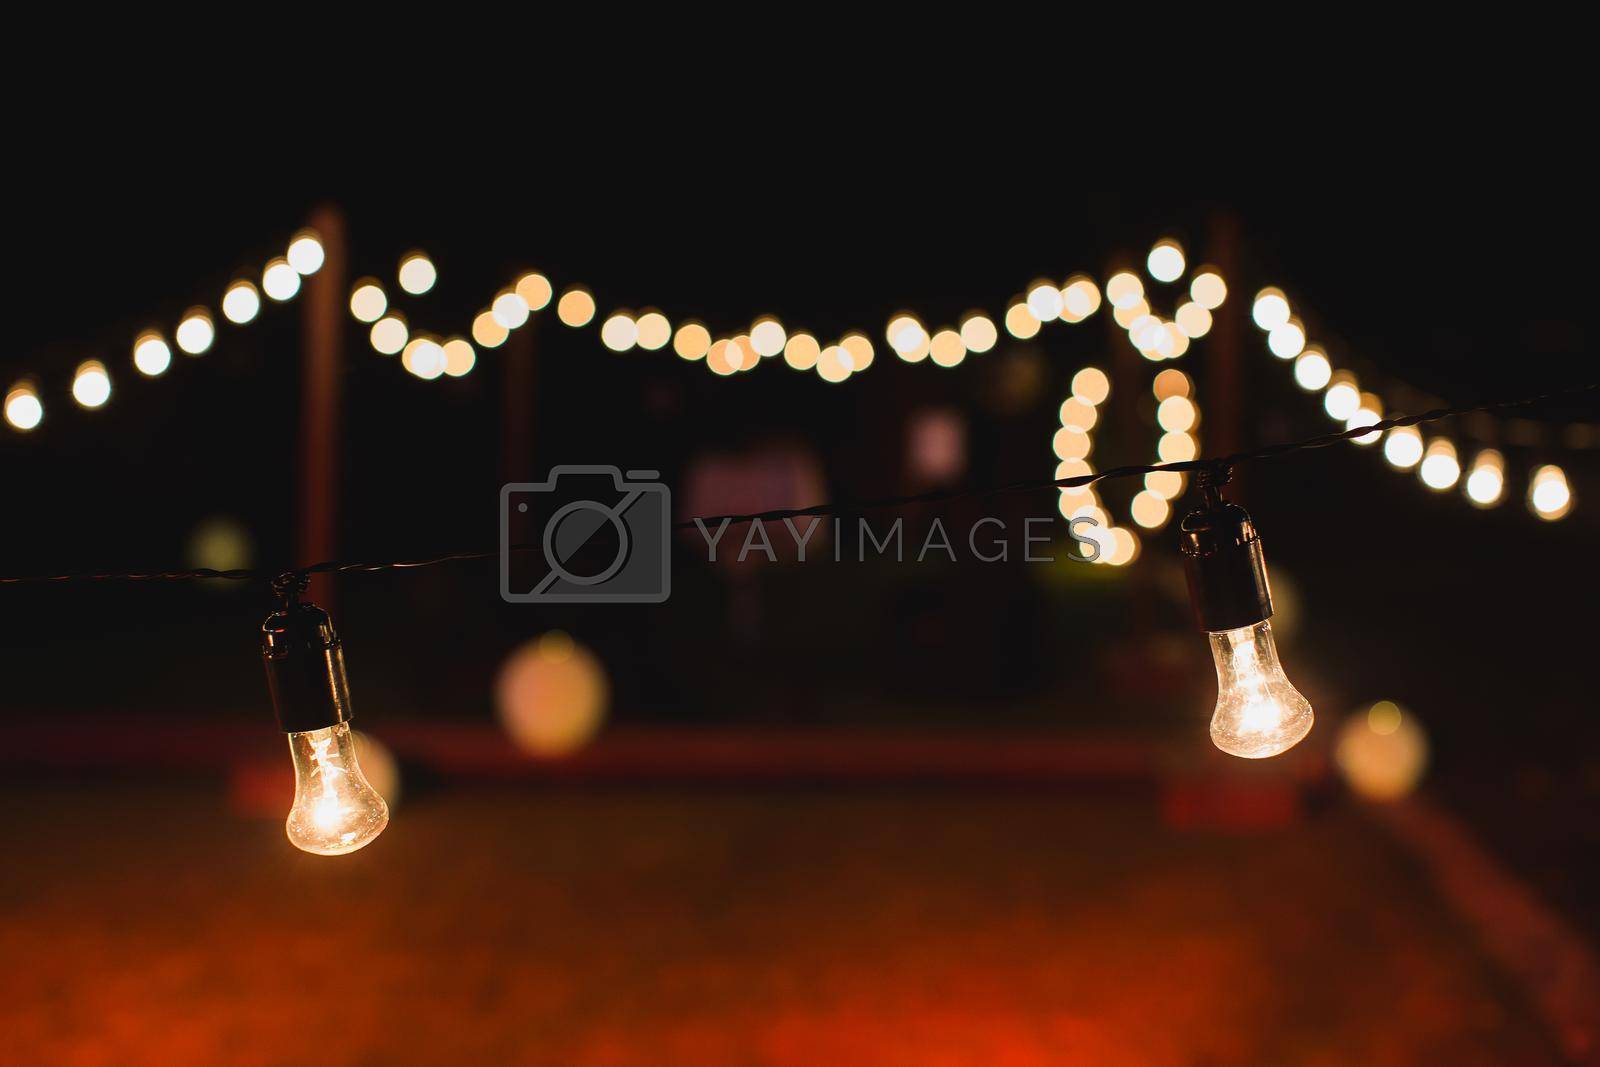 Royalty free image of outdoor string lights hanging on a line in backyard. by StudioPeace